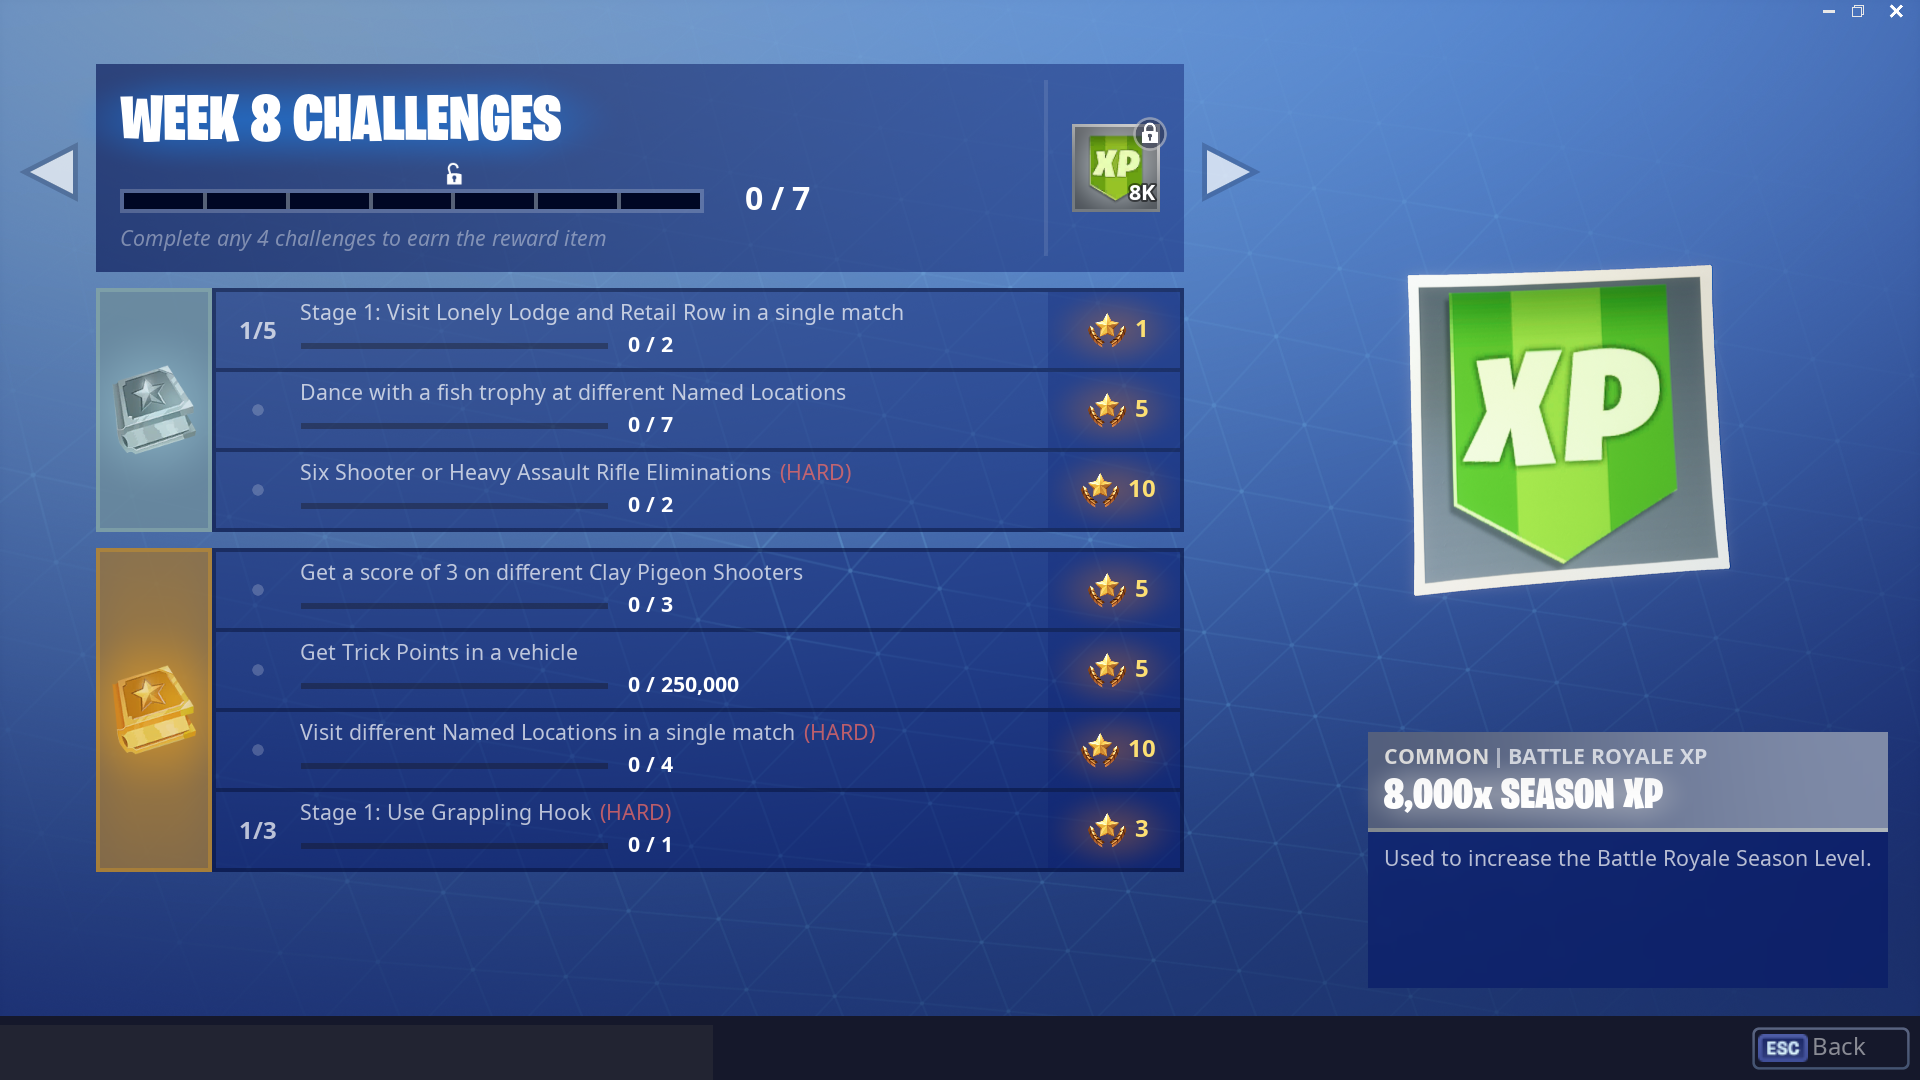 battle pass challenges and solutions for fortnite battle royale week 8 season 6 fortnite news and statistics ss1 - week 6 background fortnite season 8